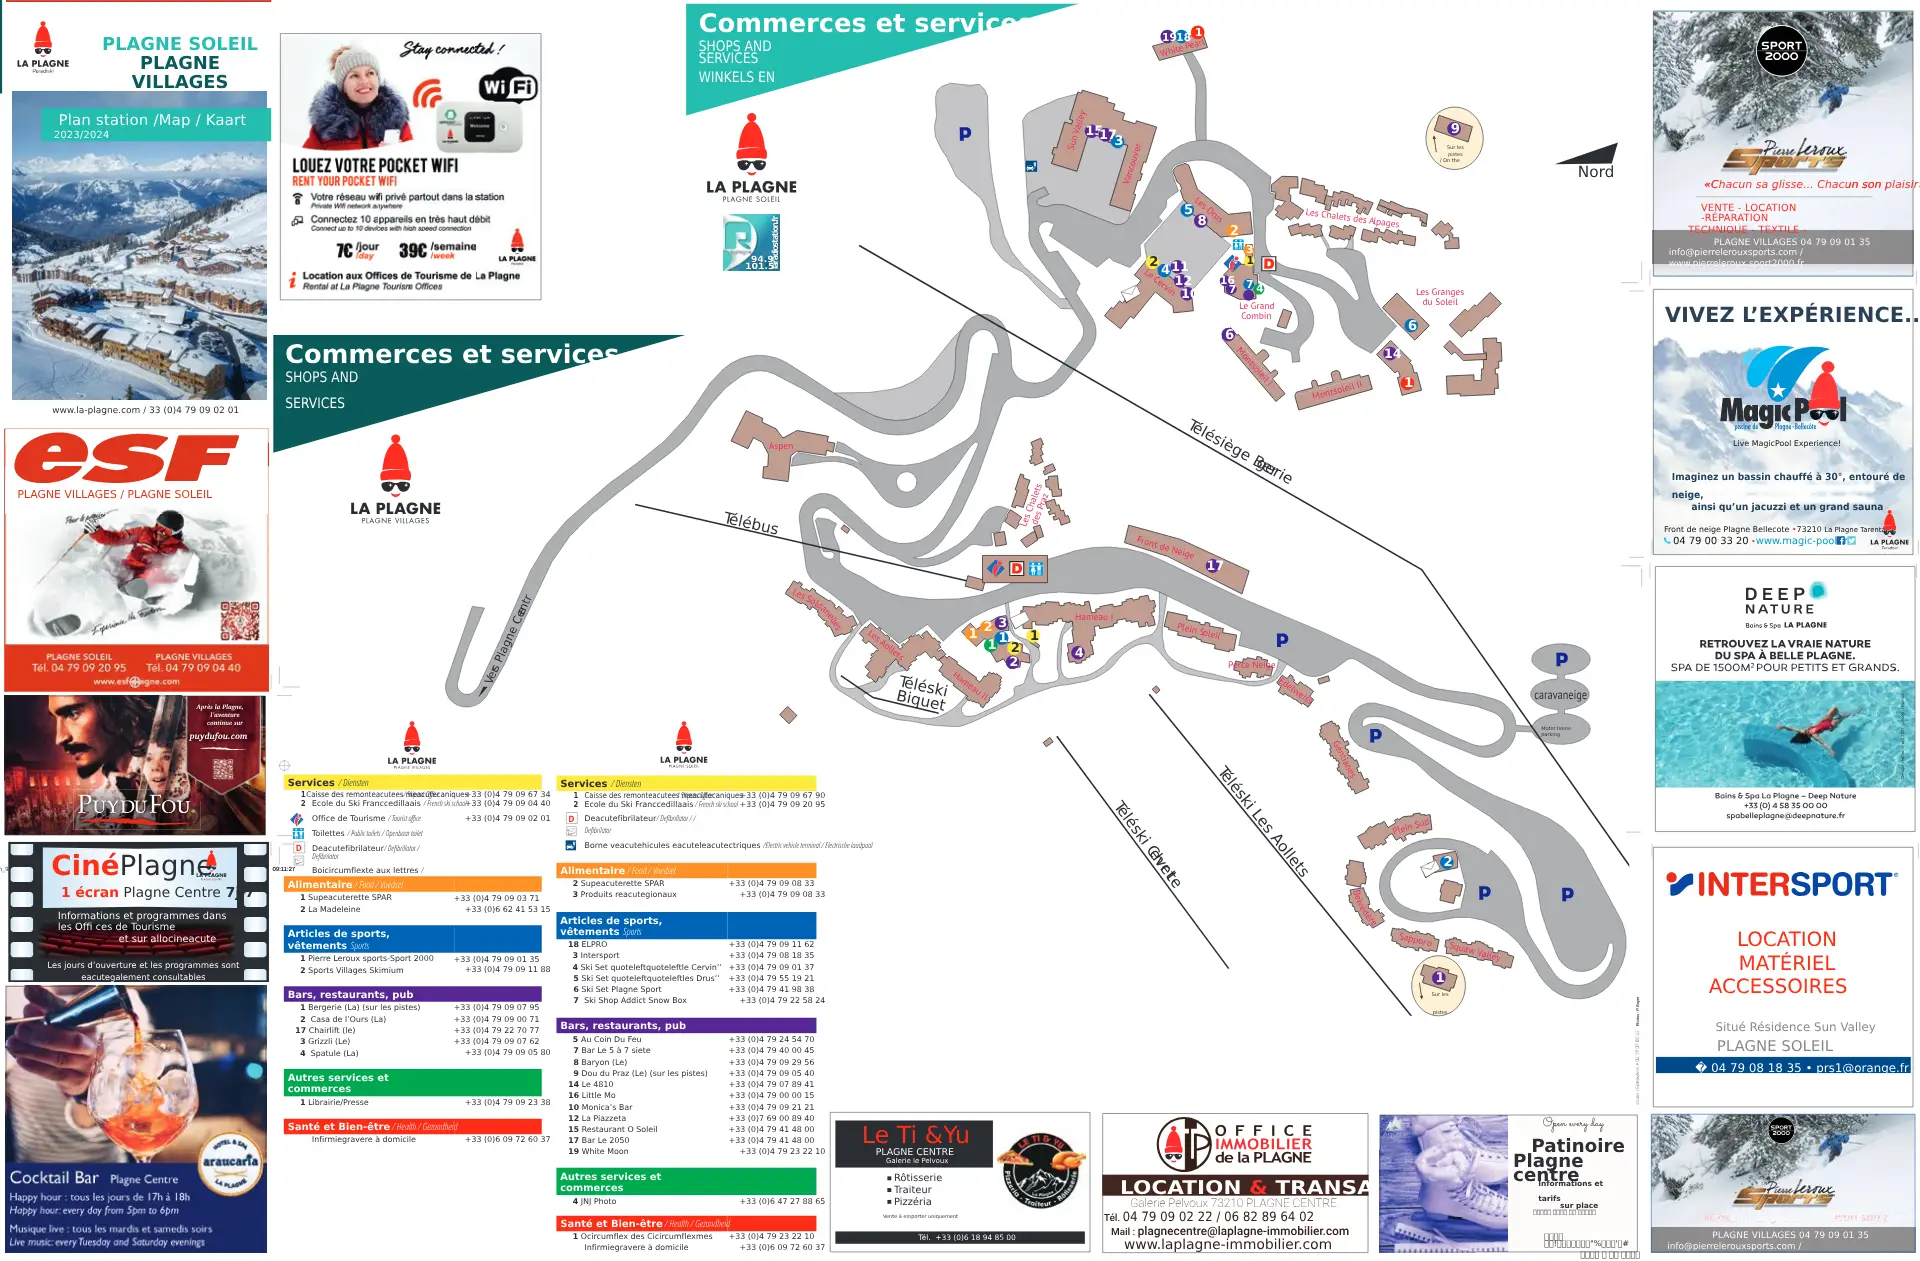 Plagne Soleil map and guide 